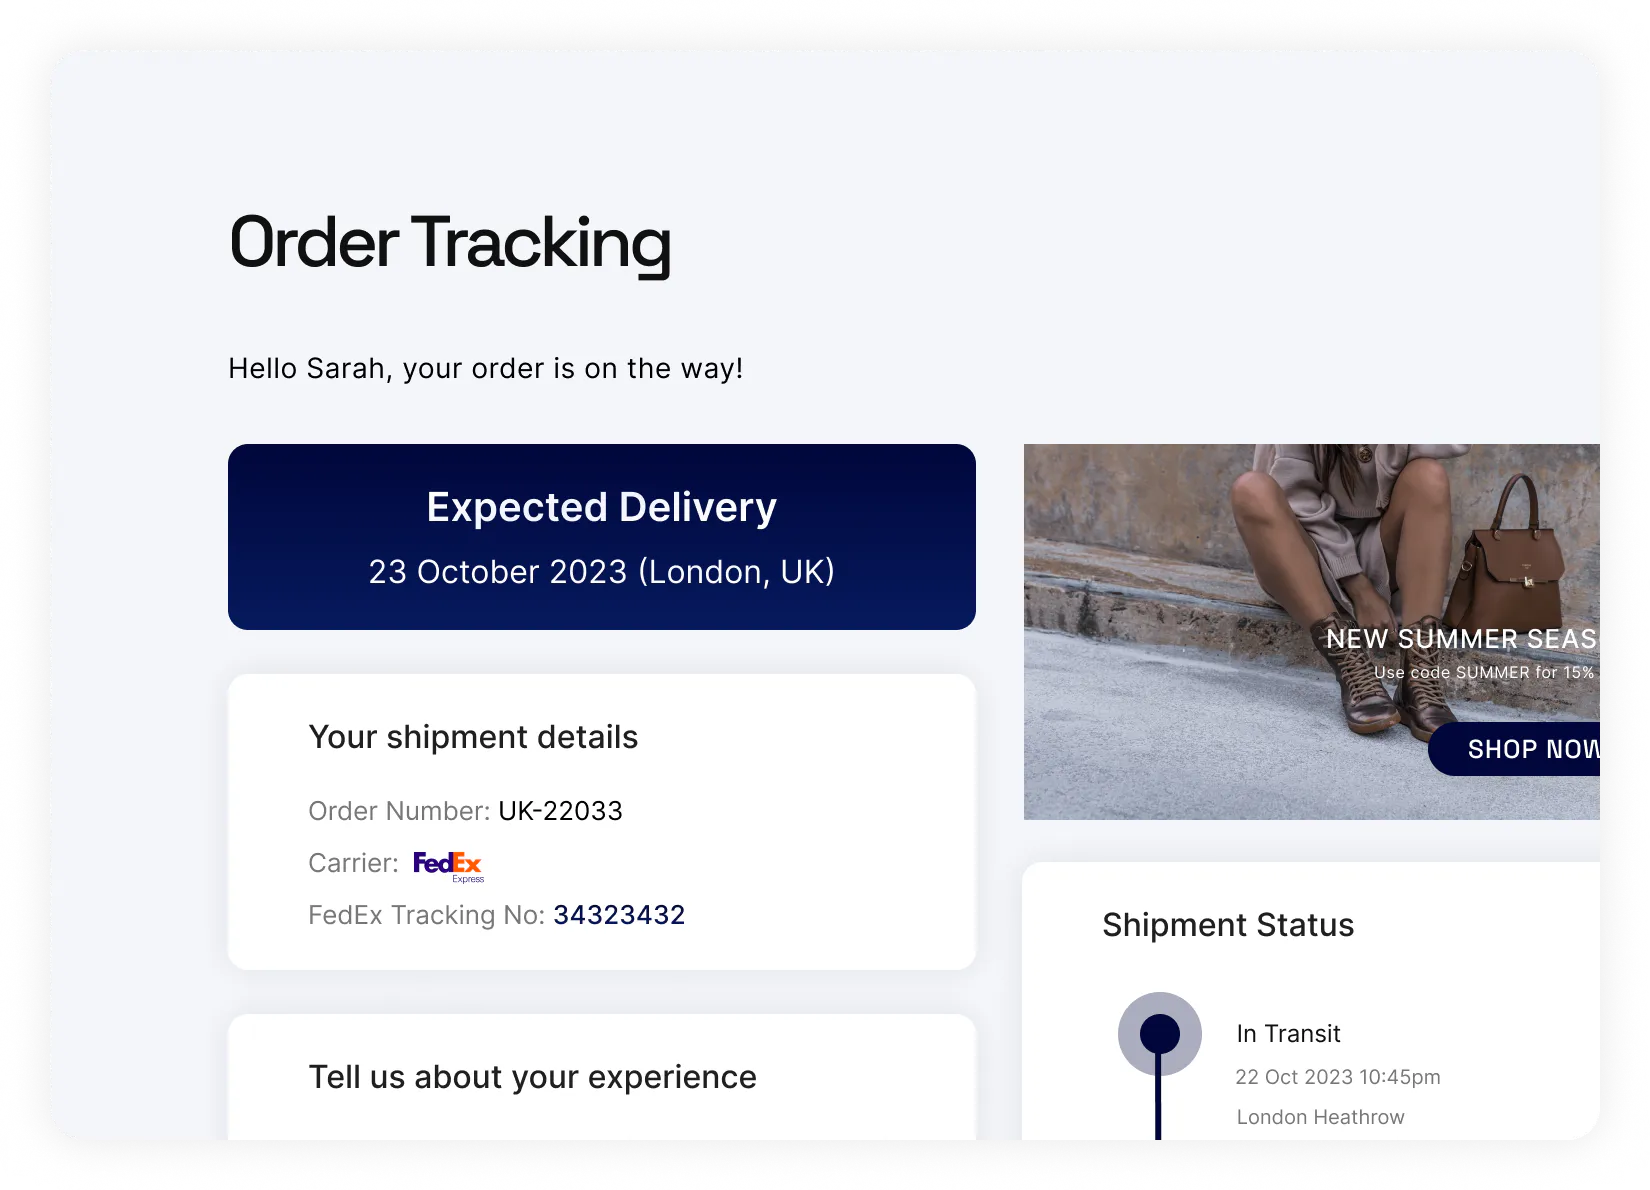 Branded Tracking Experience